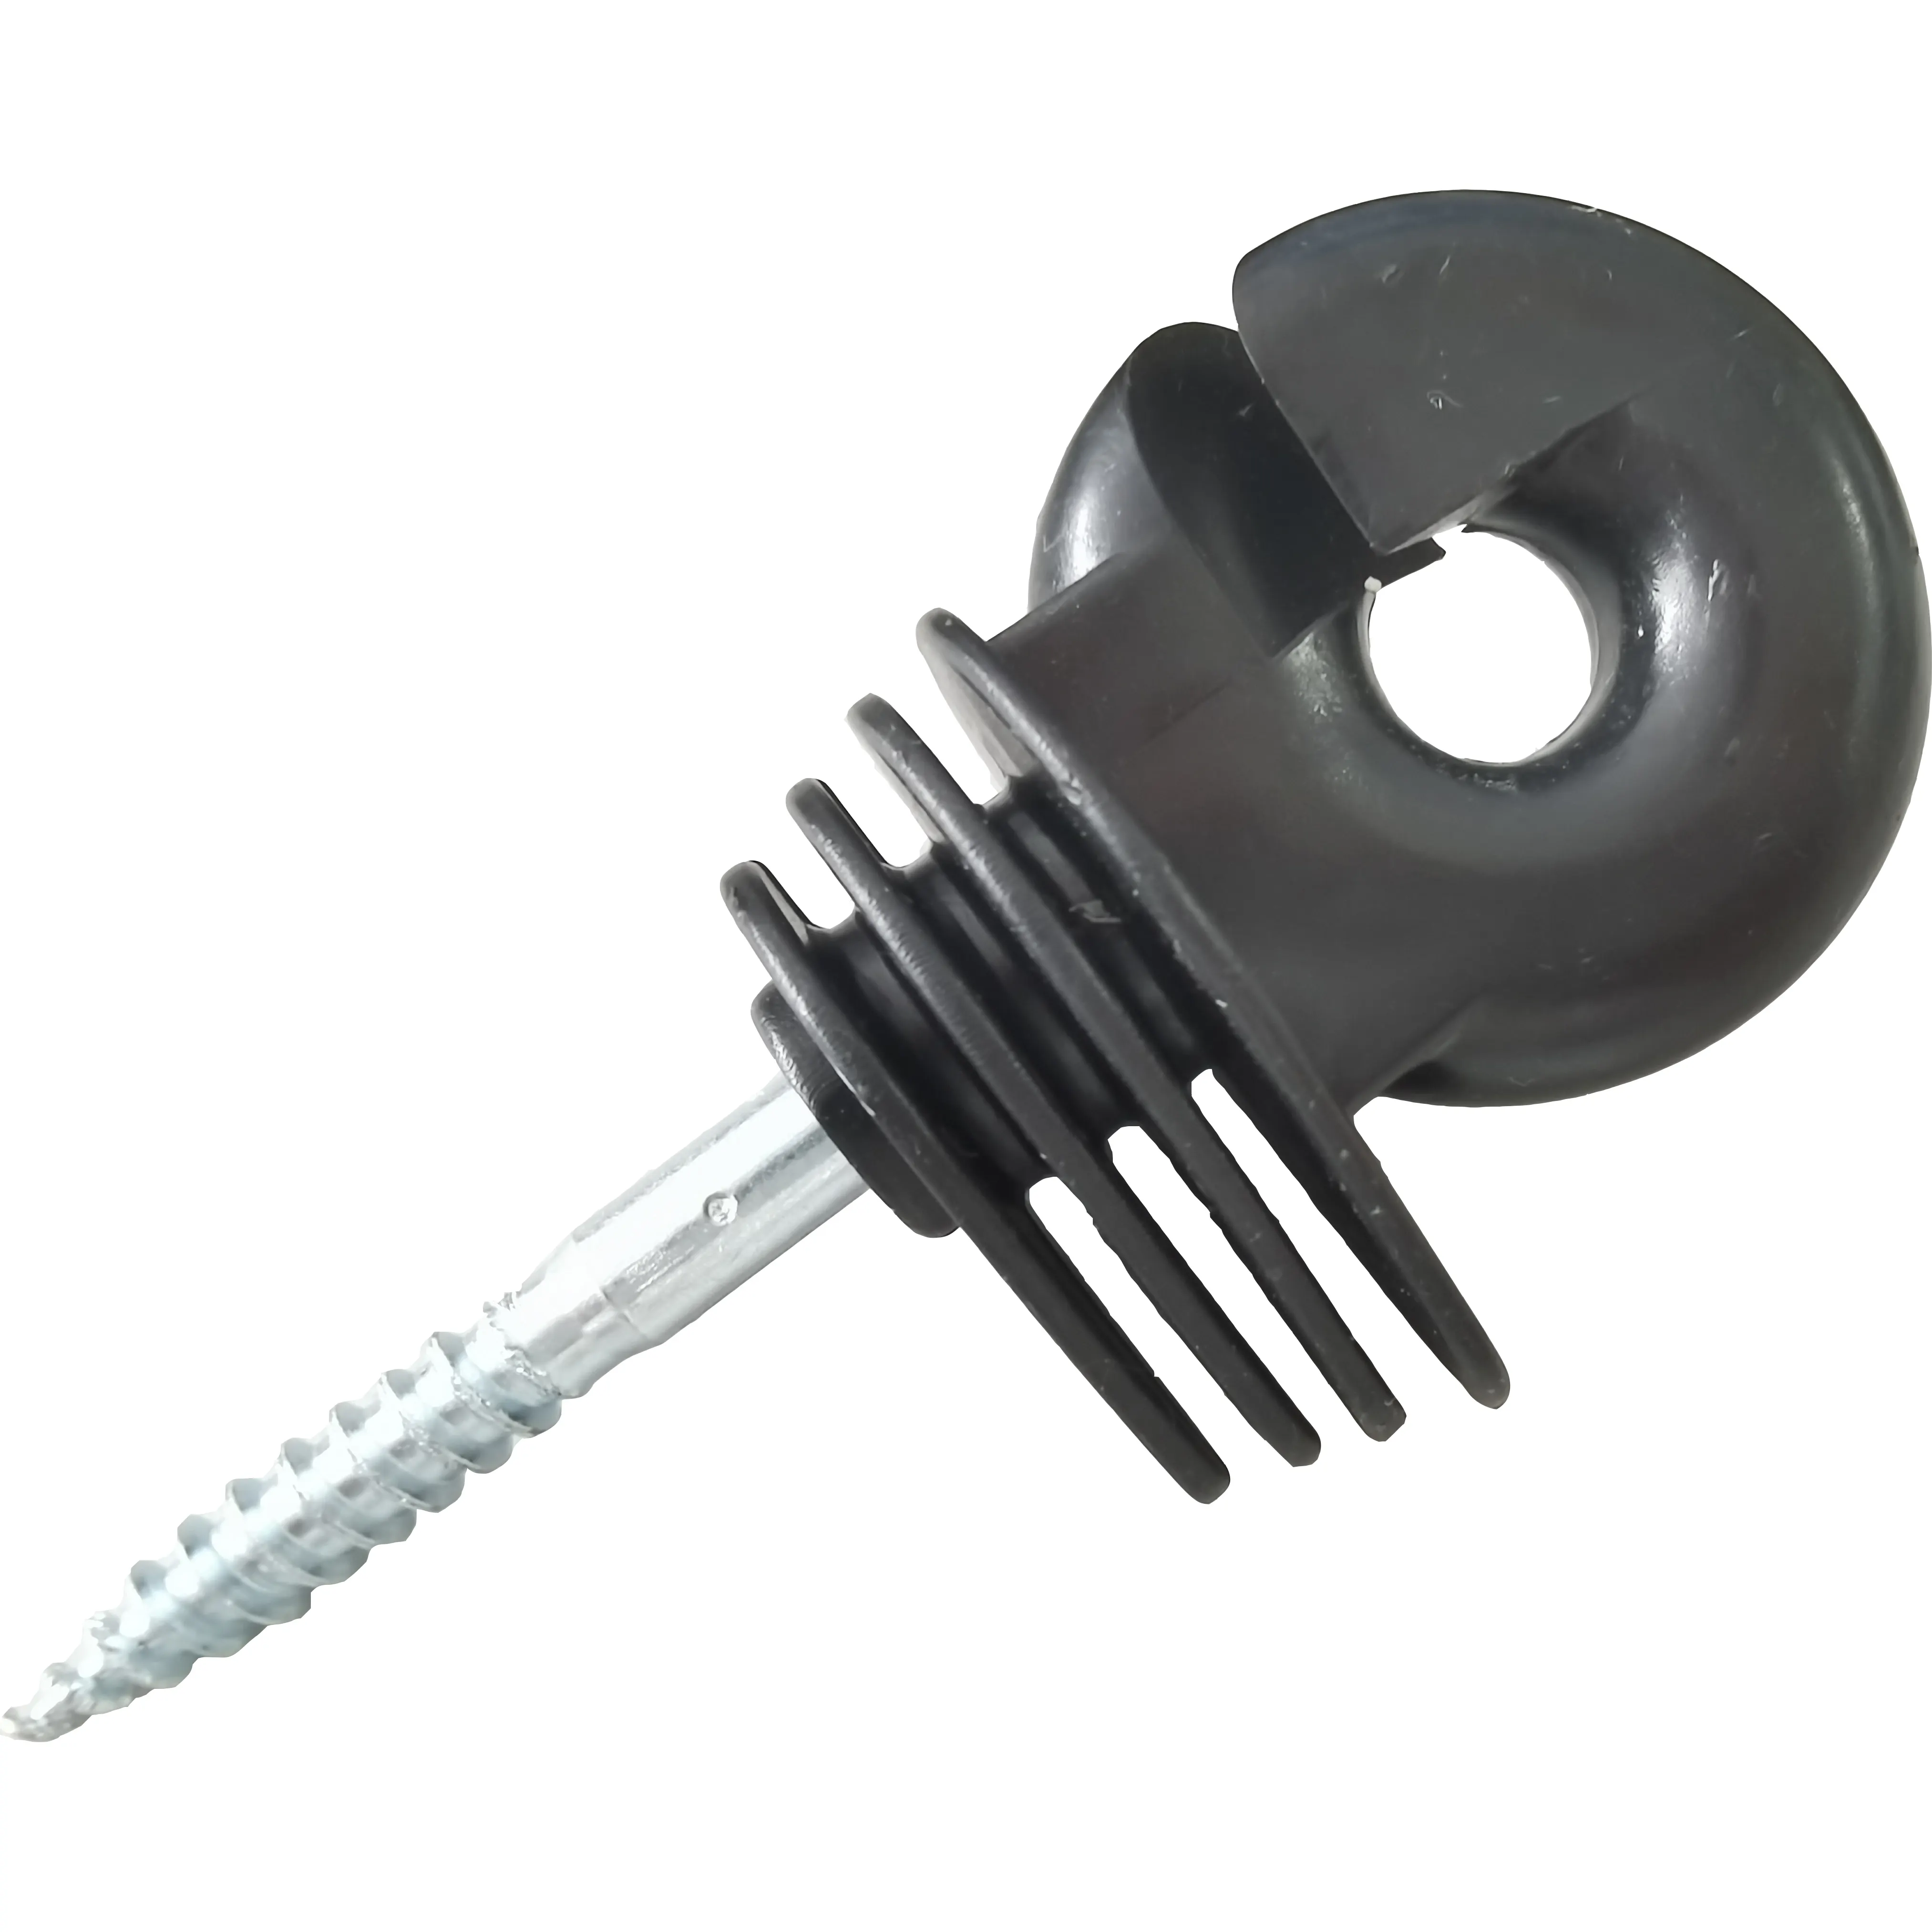 Wholesale High Quality Garden/Animal farm Fencing Screw-In Ring insulator INS301 Electric fence Insulators